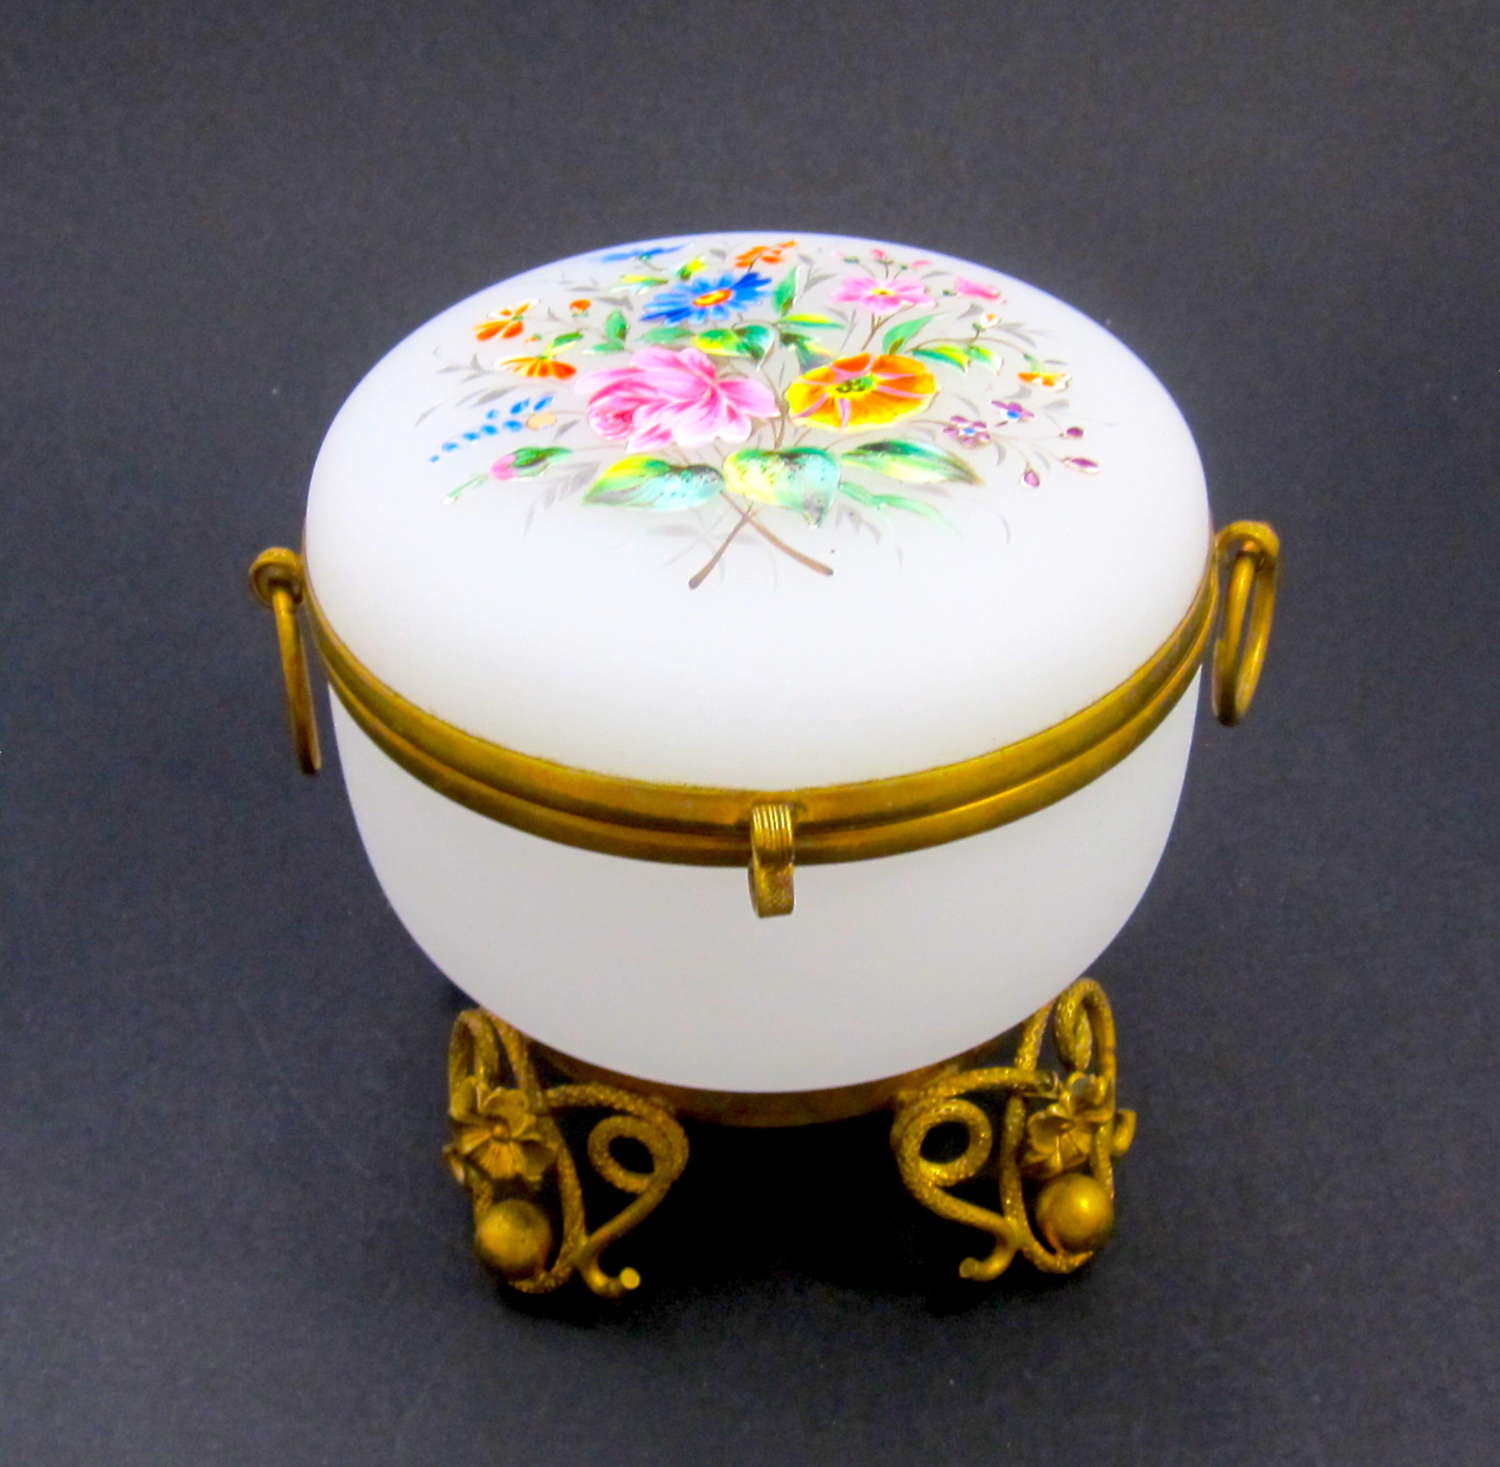 Antique French White Opaline Glass Casket Box with Pretty Flowers